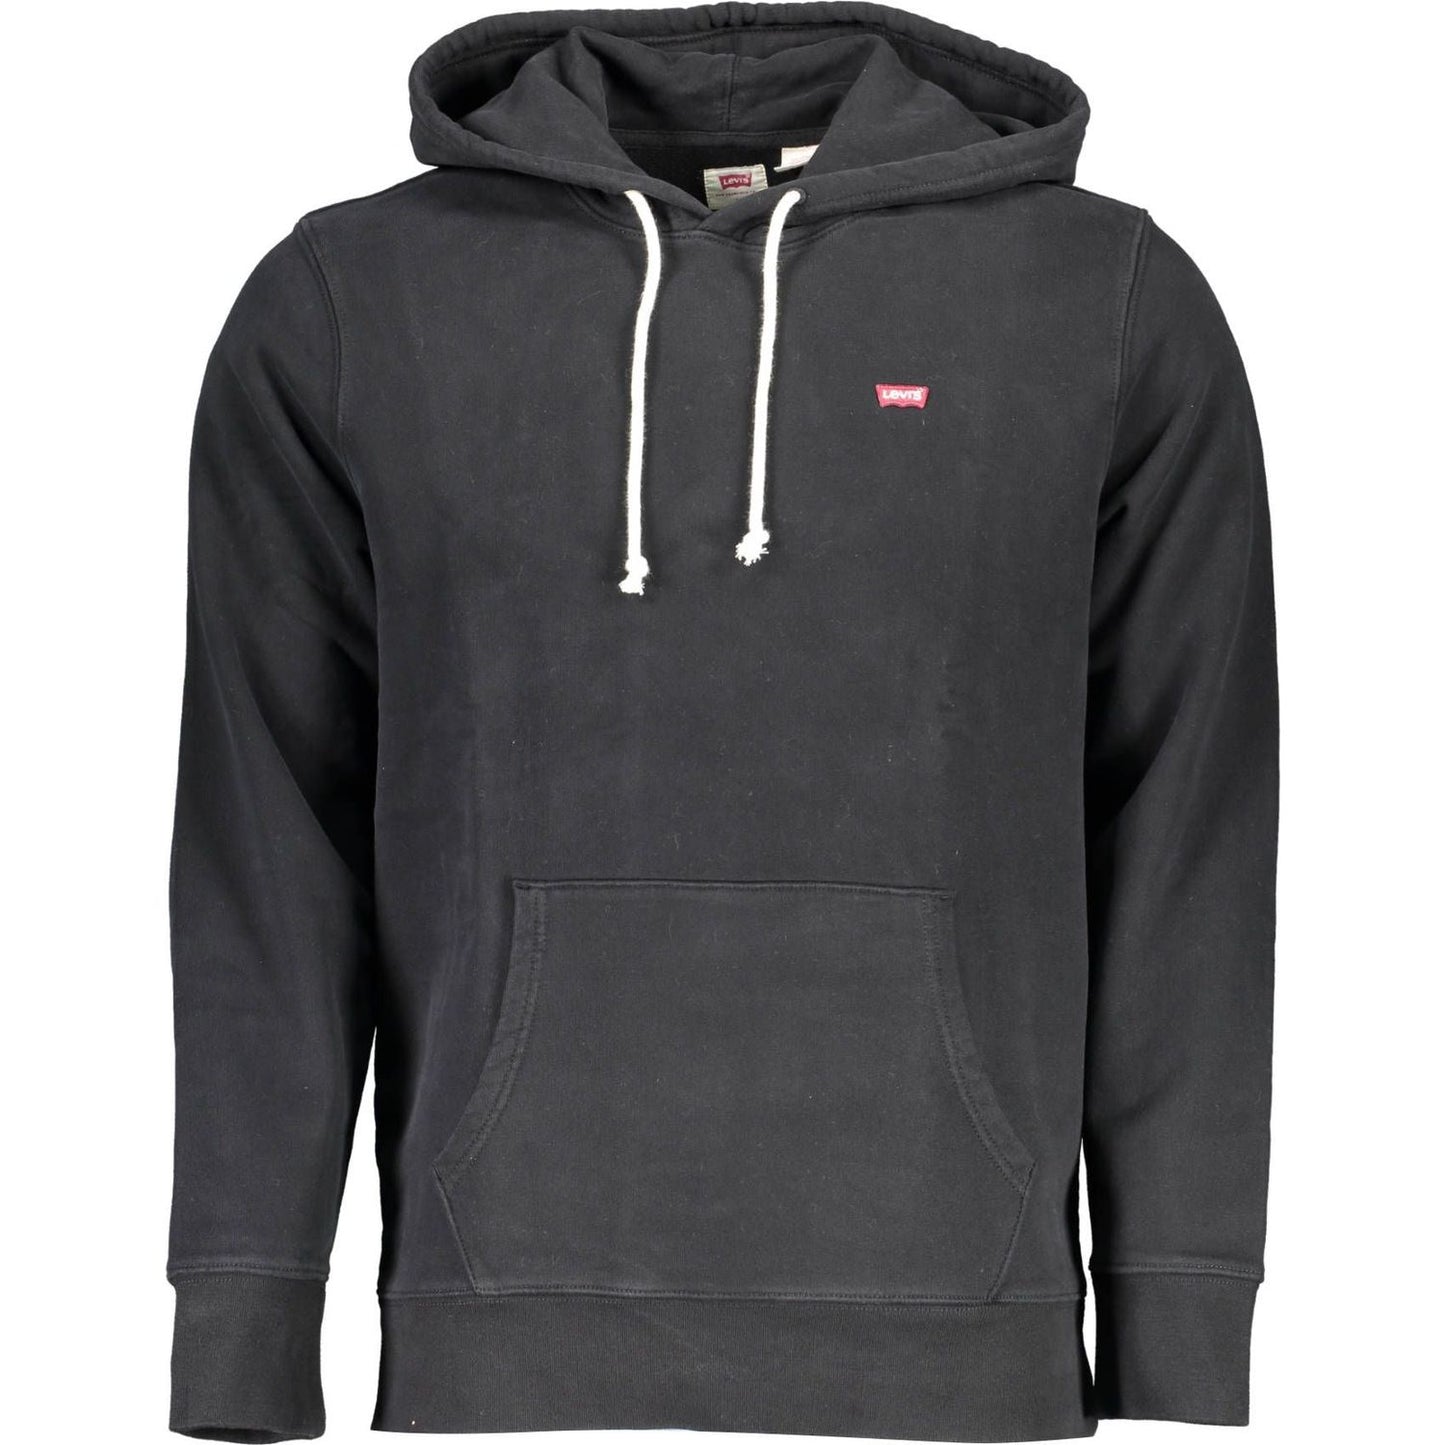 Levi's Sleek Cotton Hoodie with Central Pocket sleek-cotton-hoodie-with-central-pocket